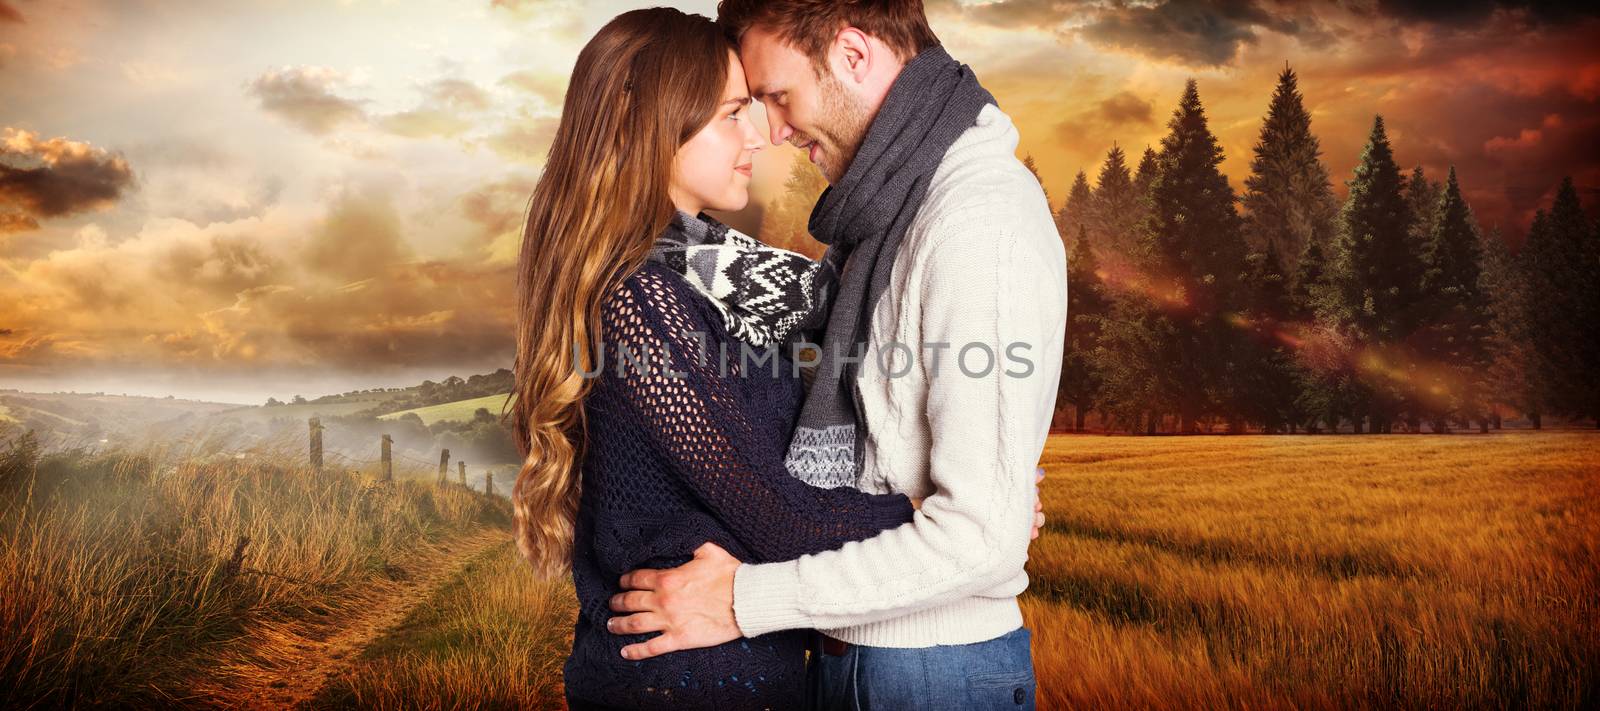 Side view of young couple embracing against country scene